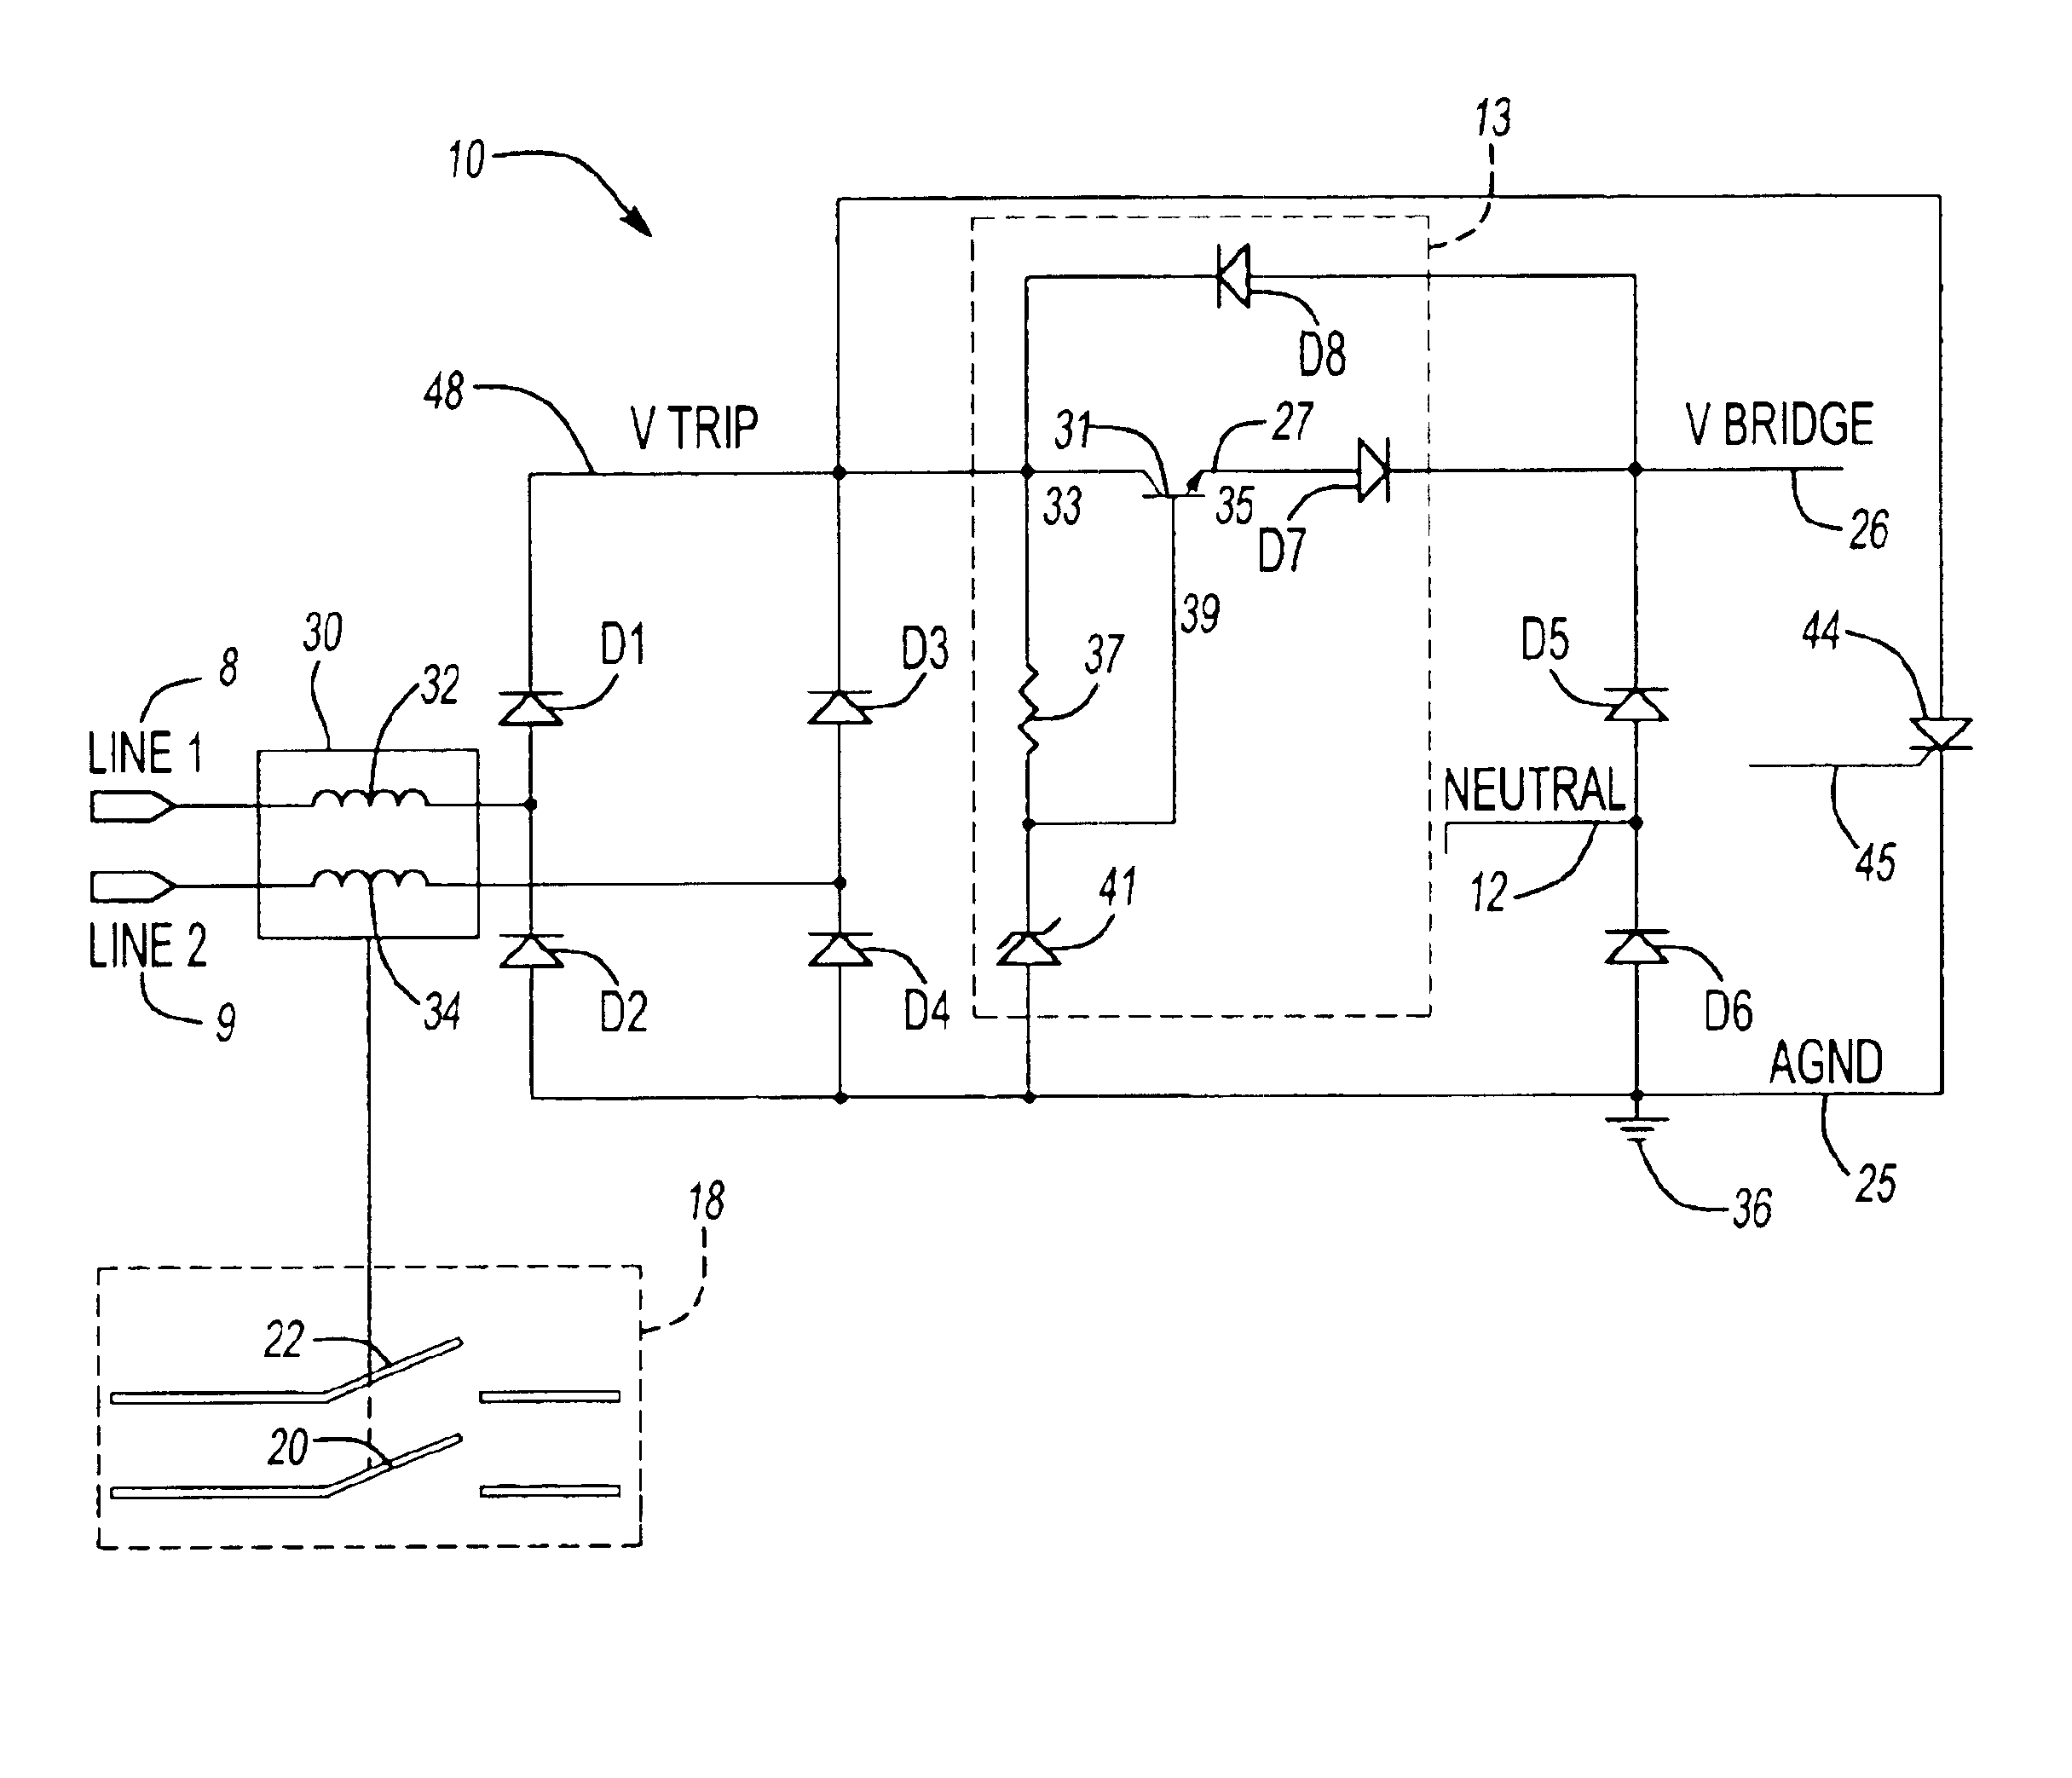 Method and system for providing power to circuit breakers